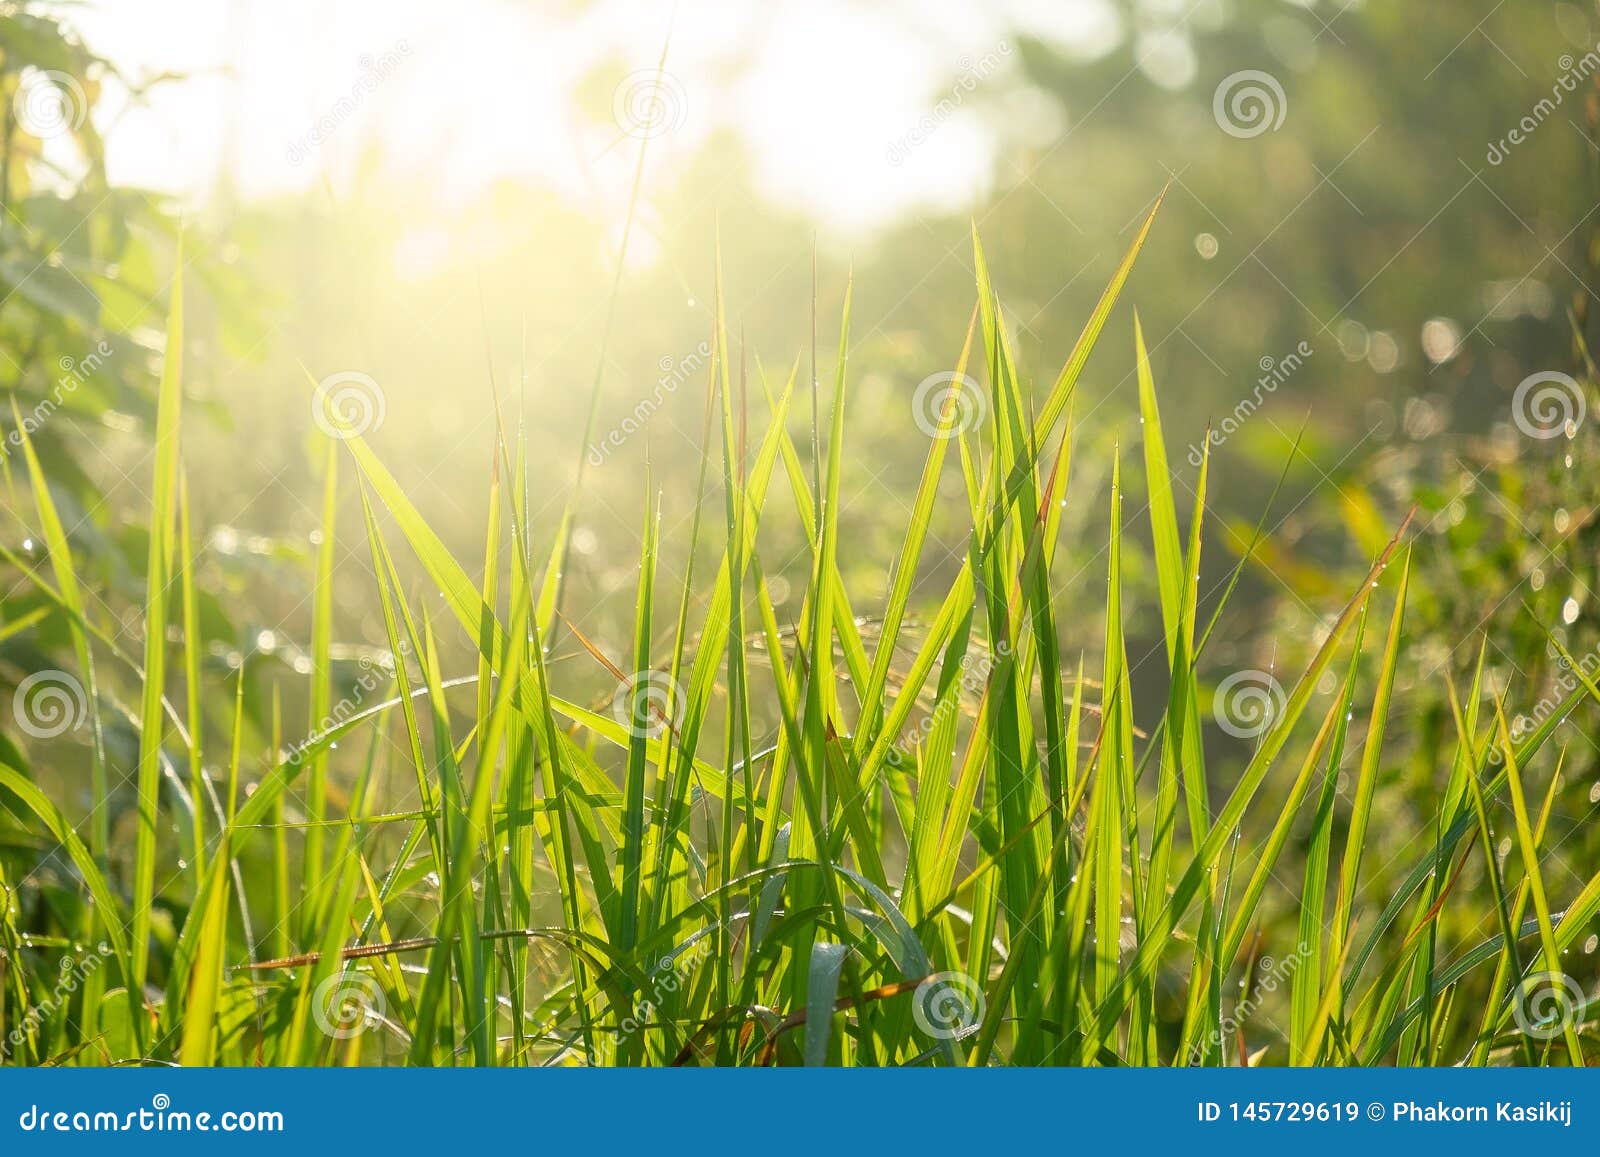 Fresh and Relax Green Spring Grass Background Under the Morning Sun